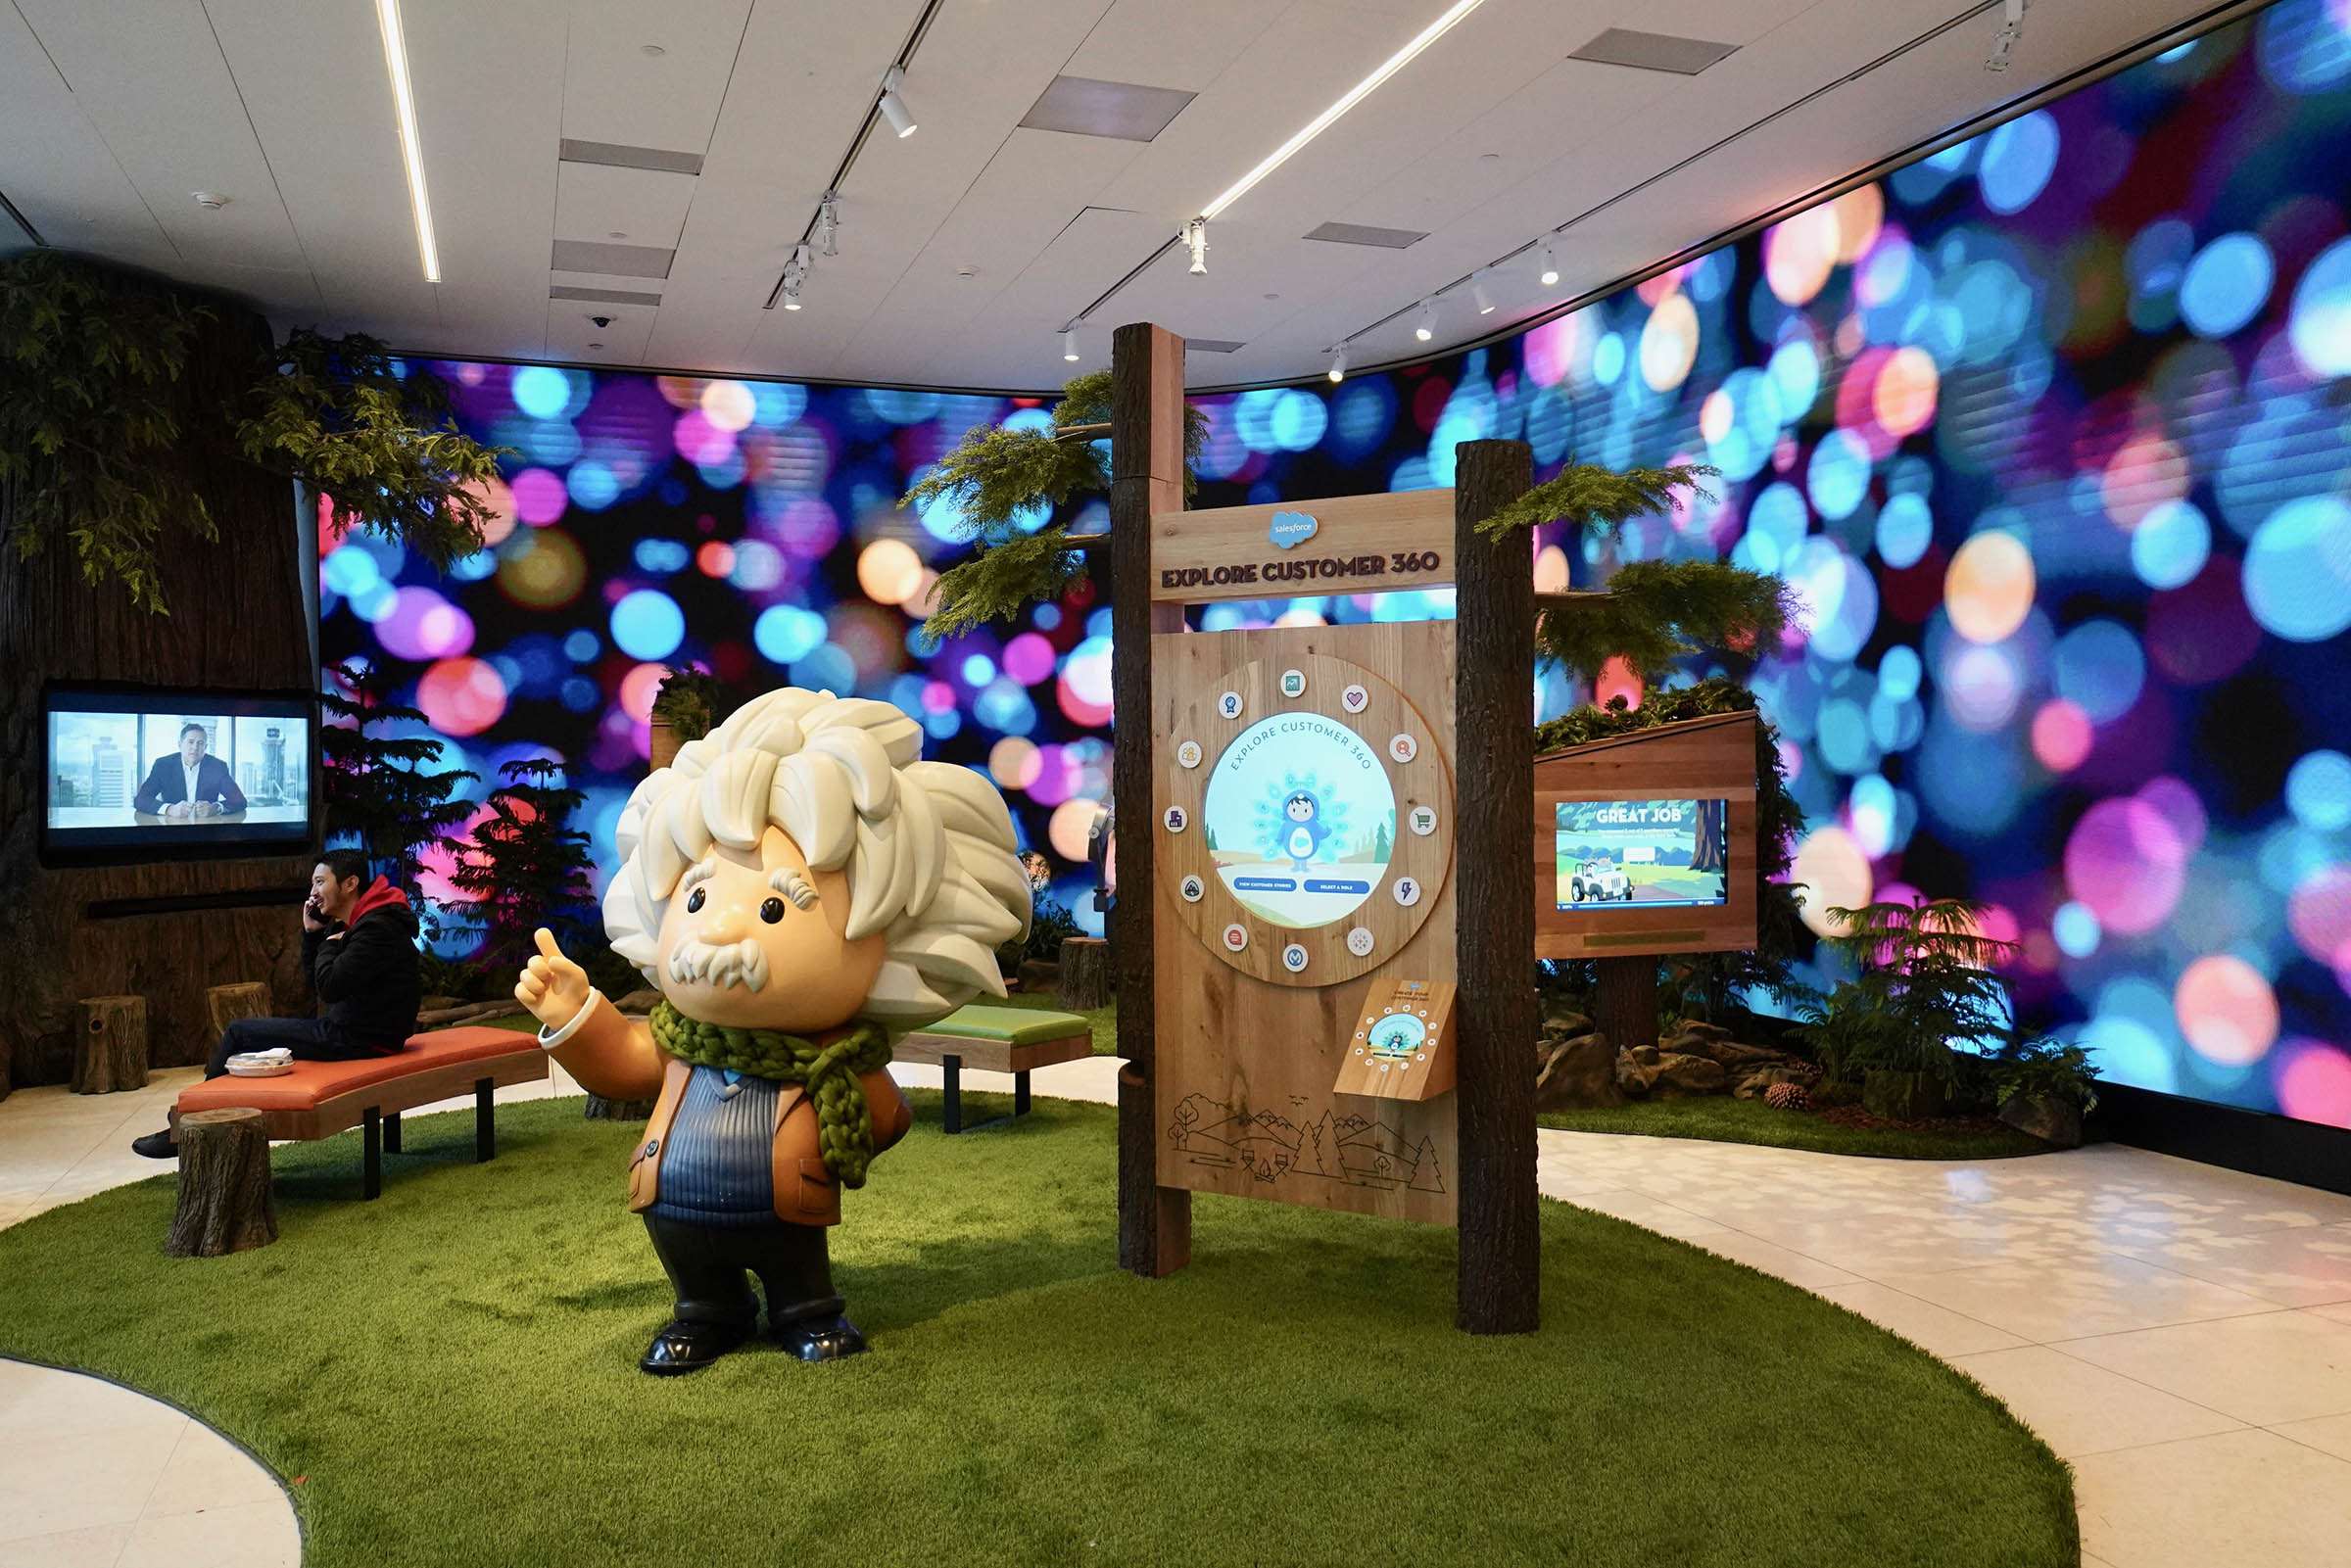 Salesforce Customer 360 at Dreamforce by Marcus Guttenplan for Sparks